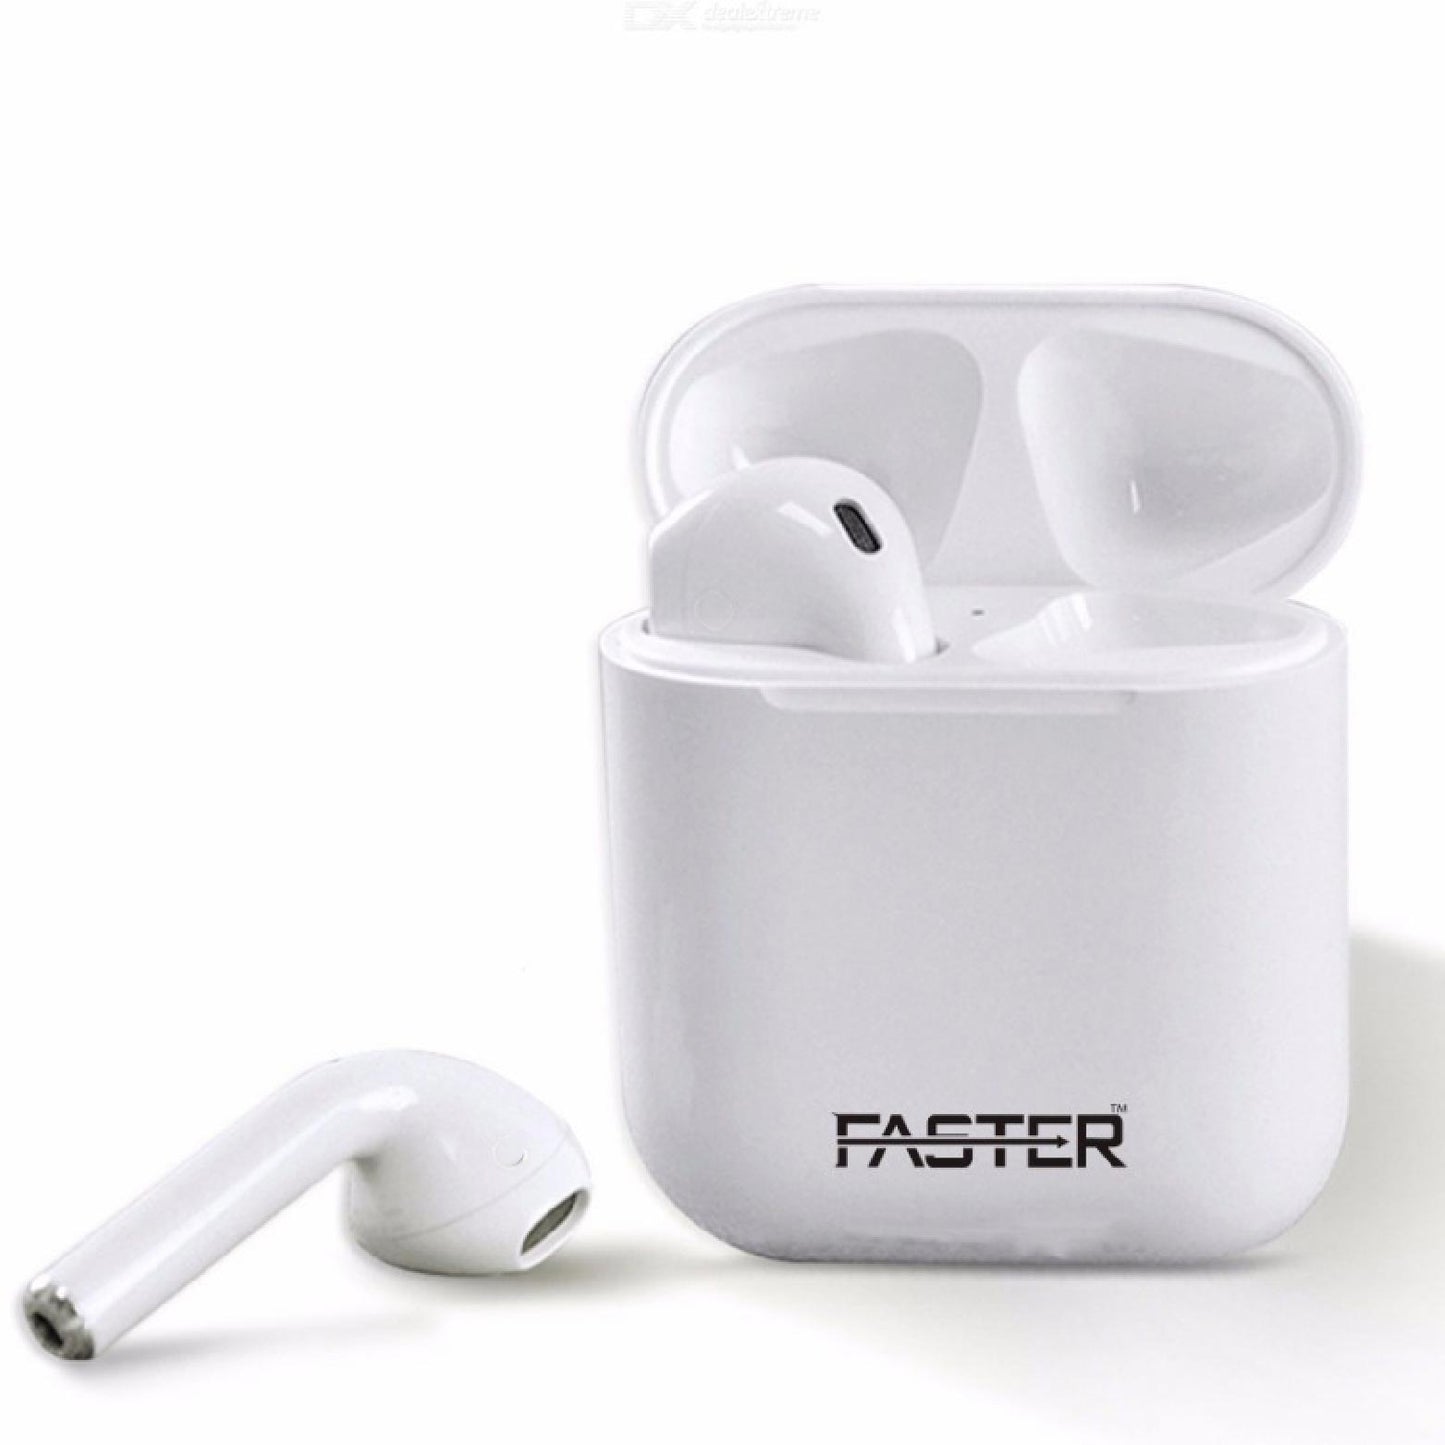 Faster Stereo Earbuds Price in Pakistan 